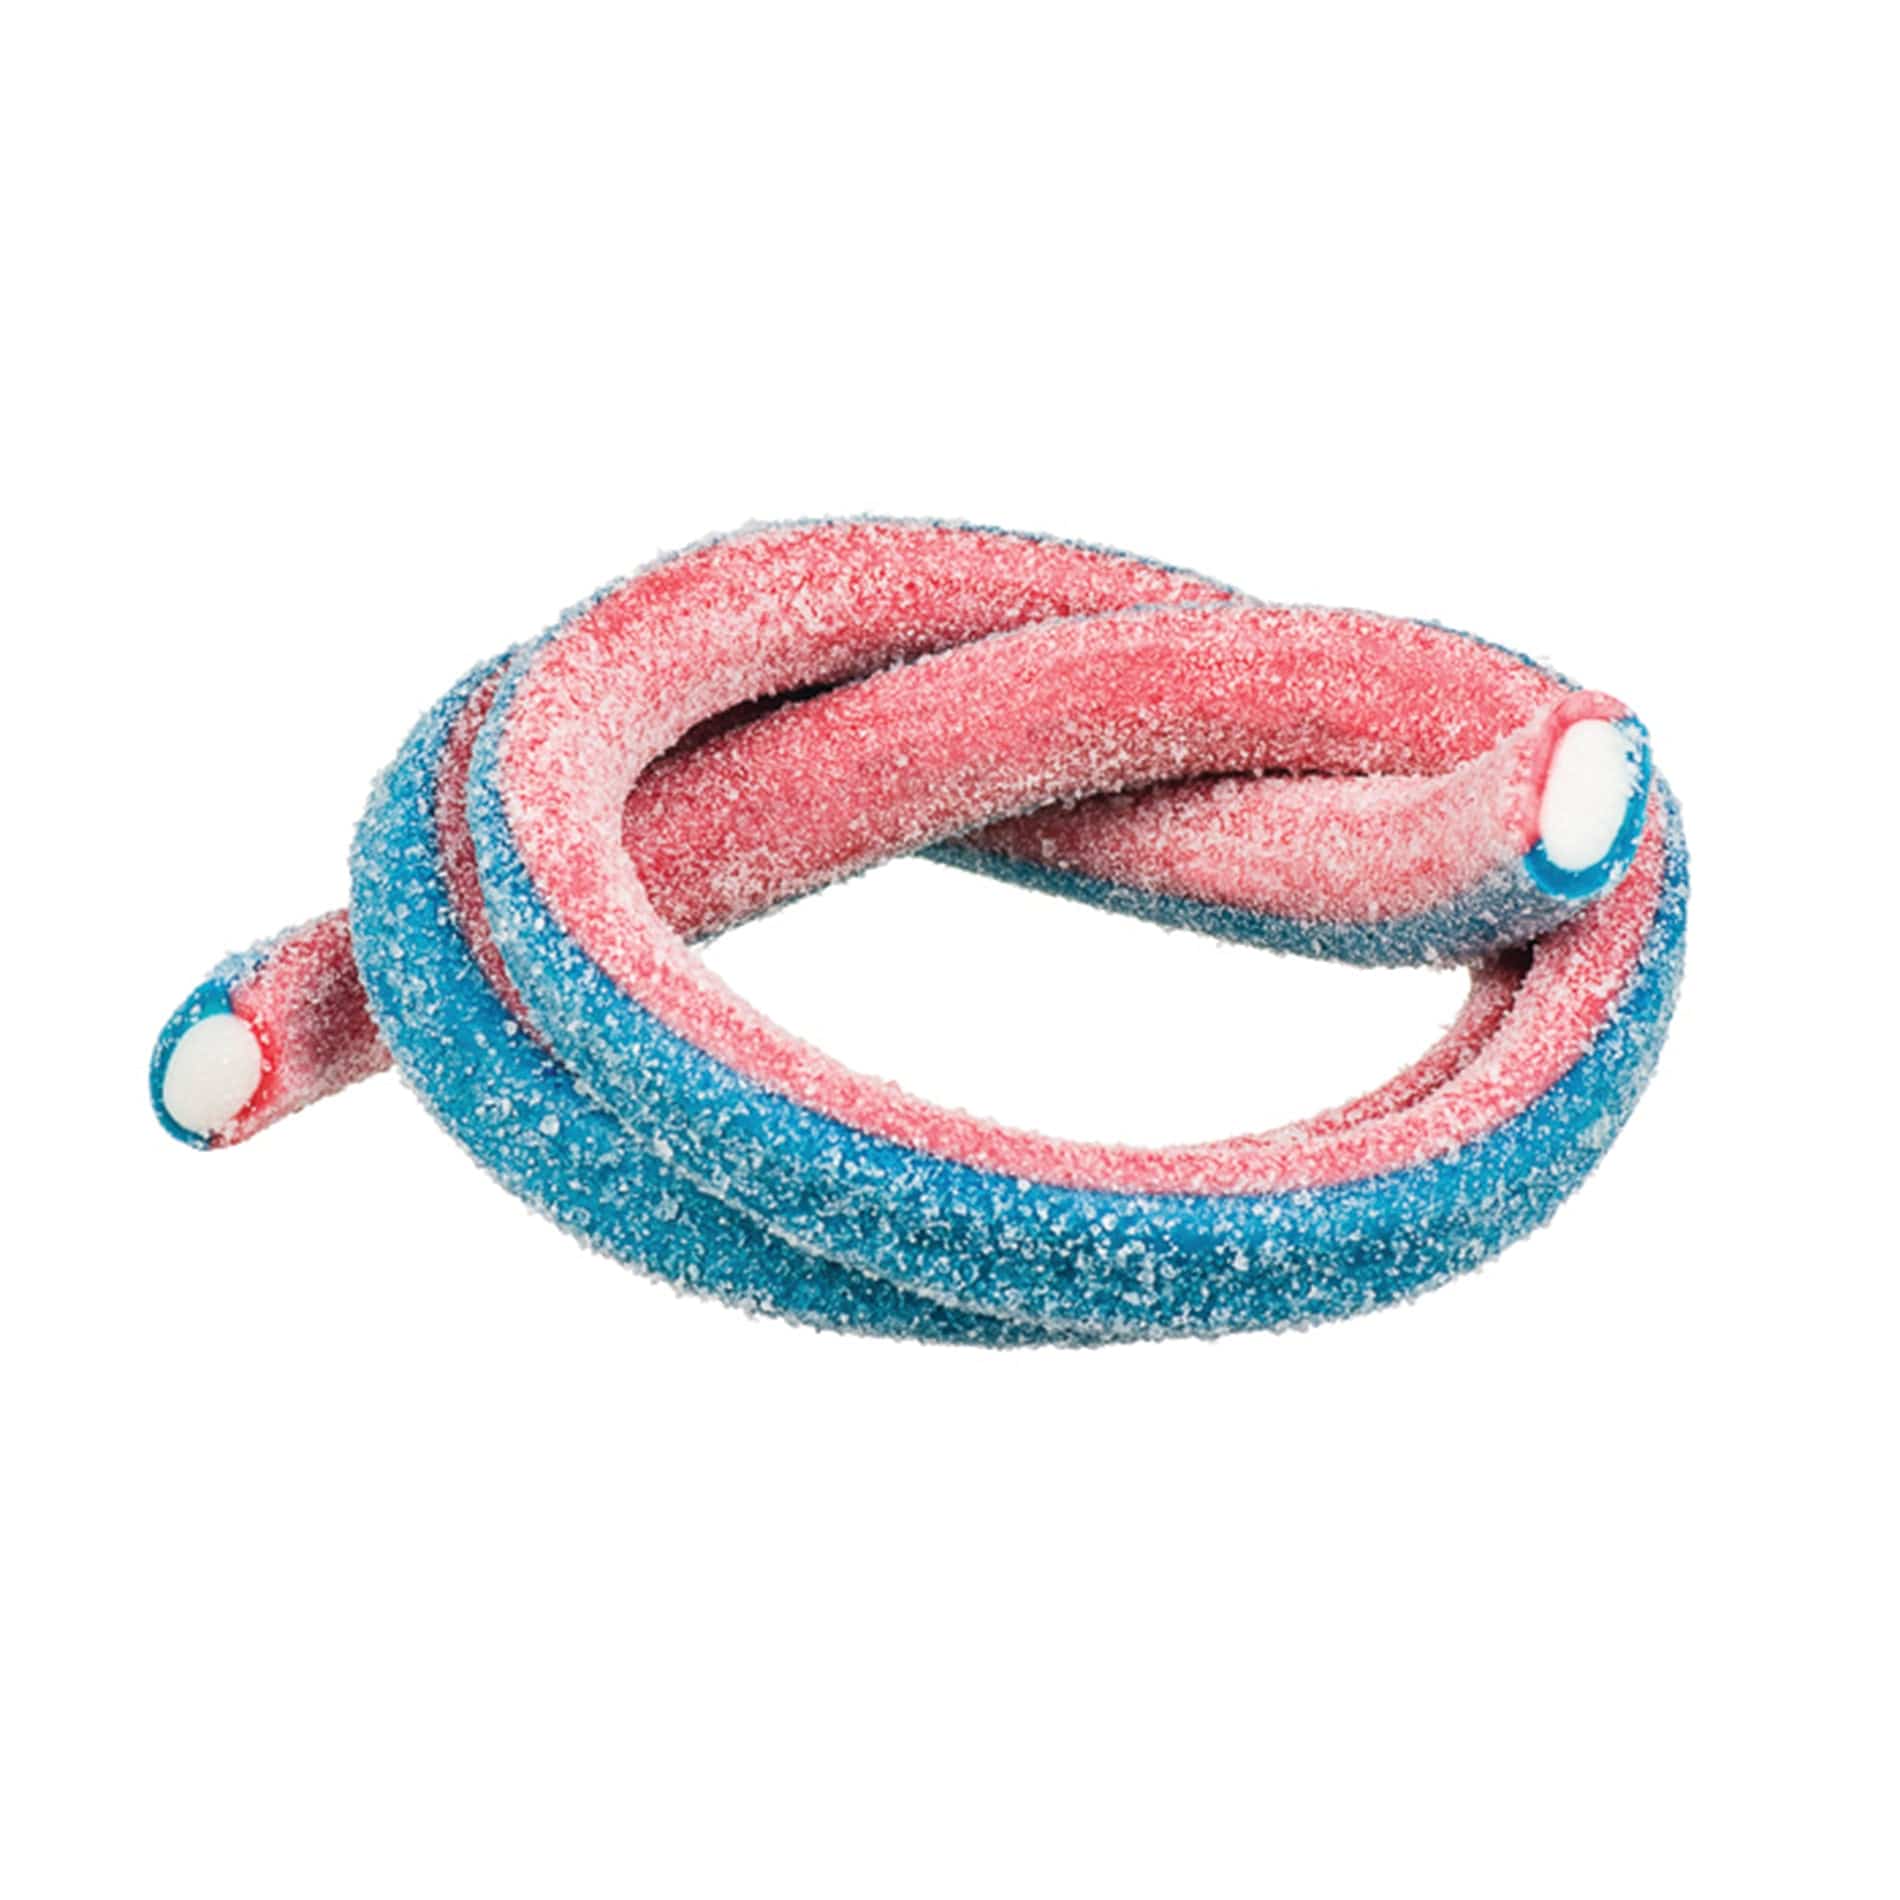 Novelty Concessions Gummy Rope SOUR BLUEBERRY STRAWBERRY / 1 Pack (30 pieces) Meeega Cables European Chewy Rope Candy - Box of 30 individually wrapped Meeega Cables, each over 2-feet long cups with lids and straws